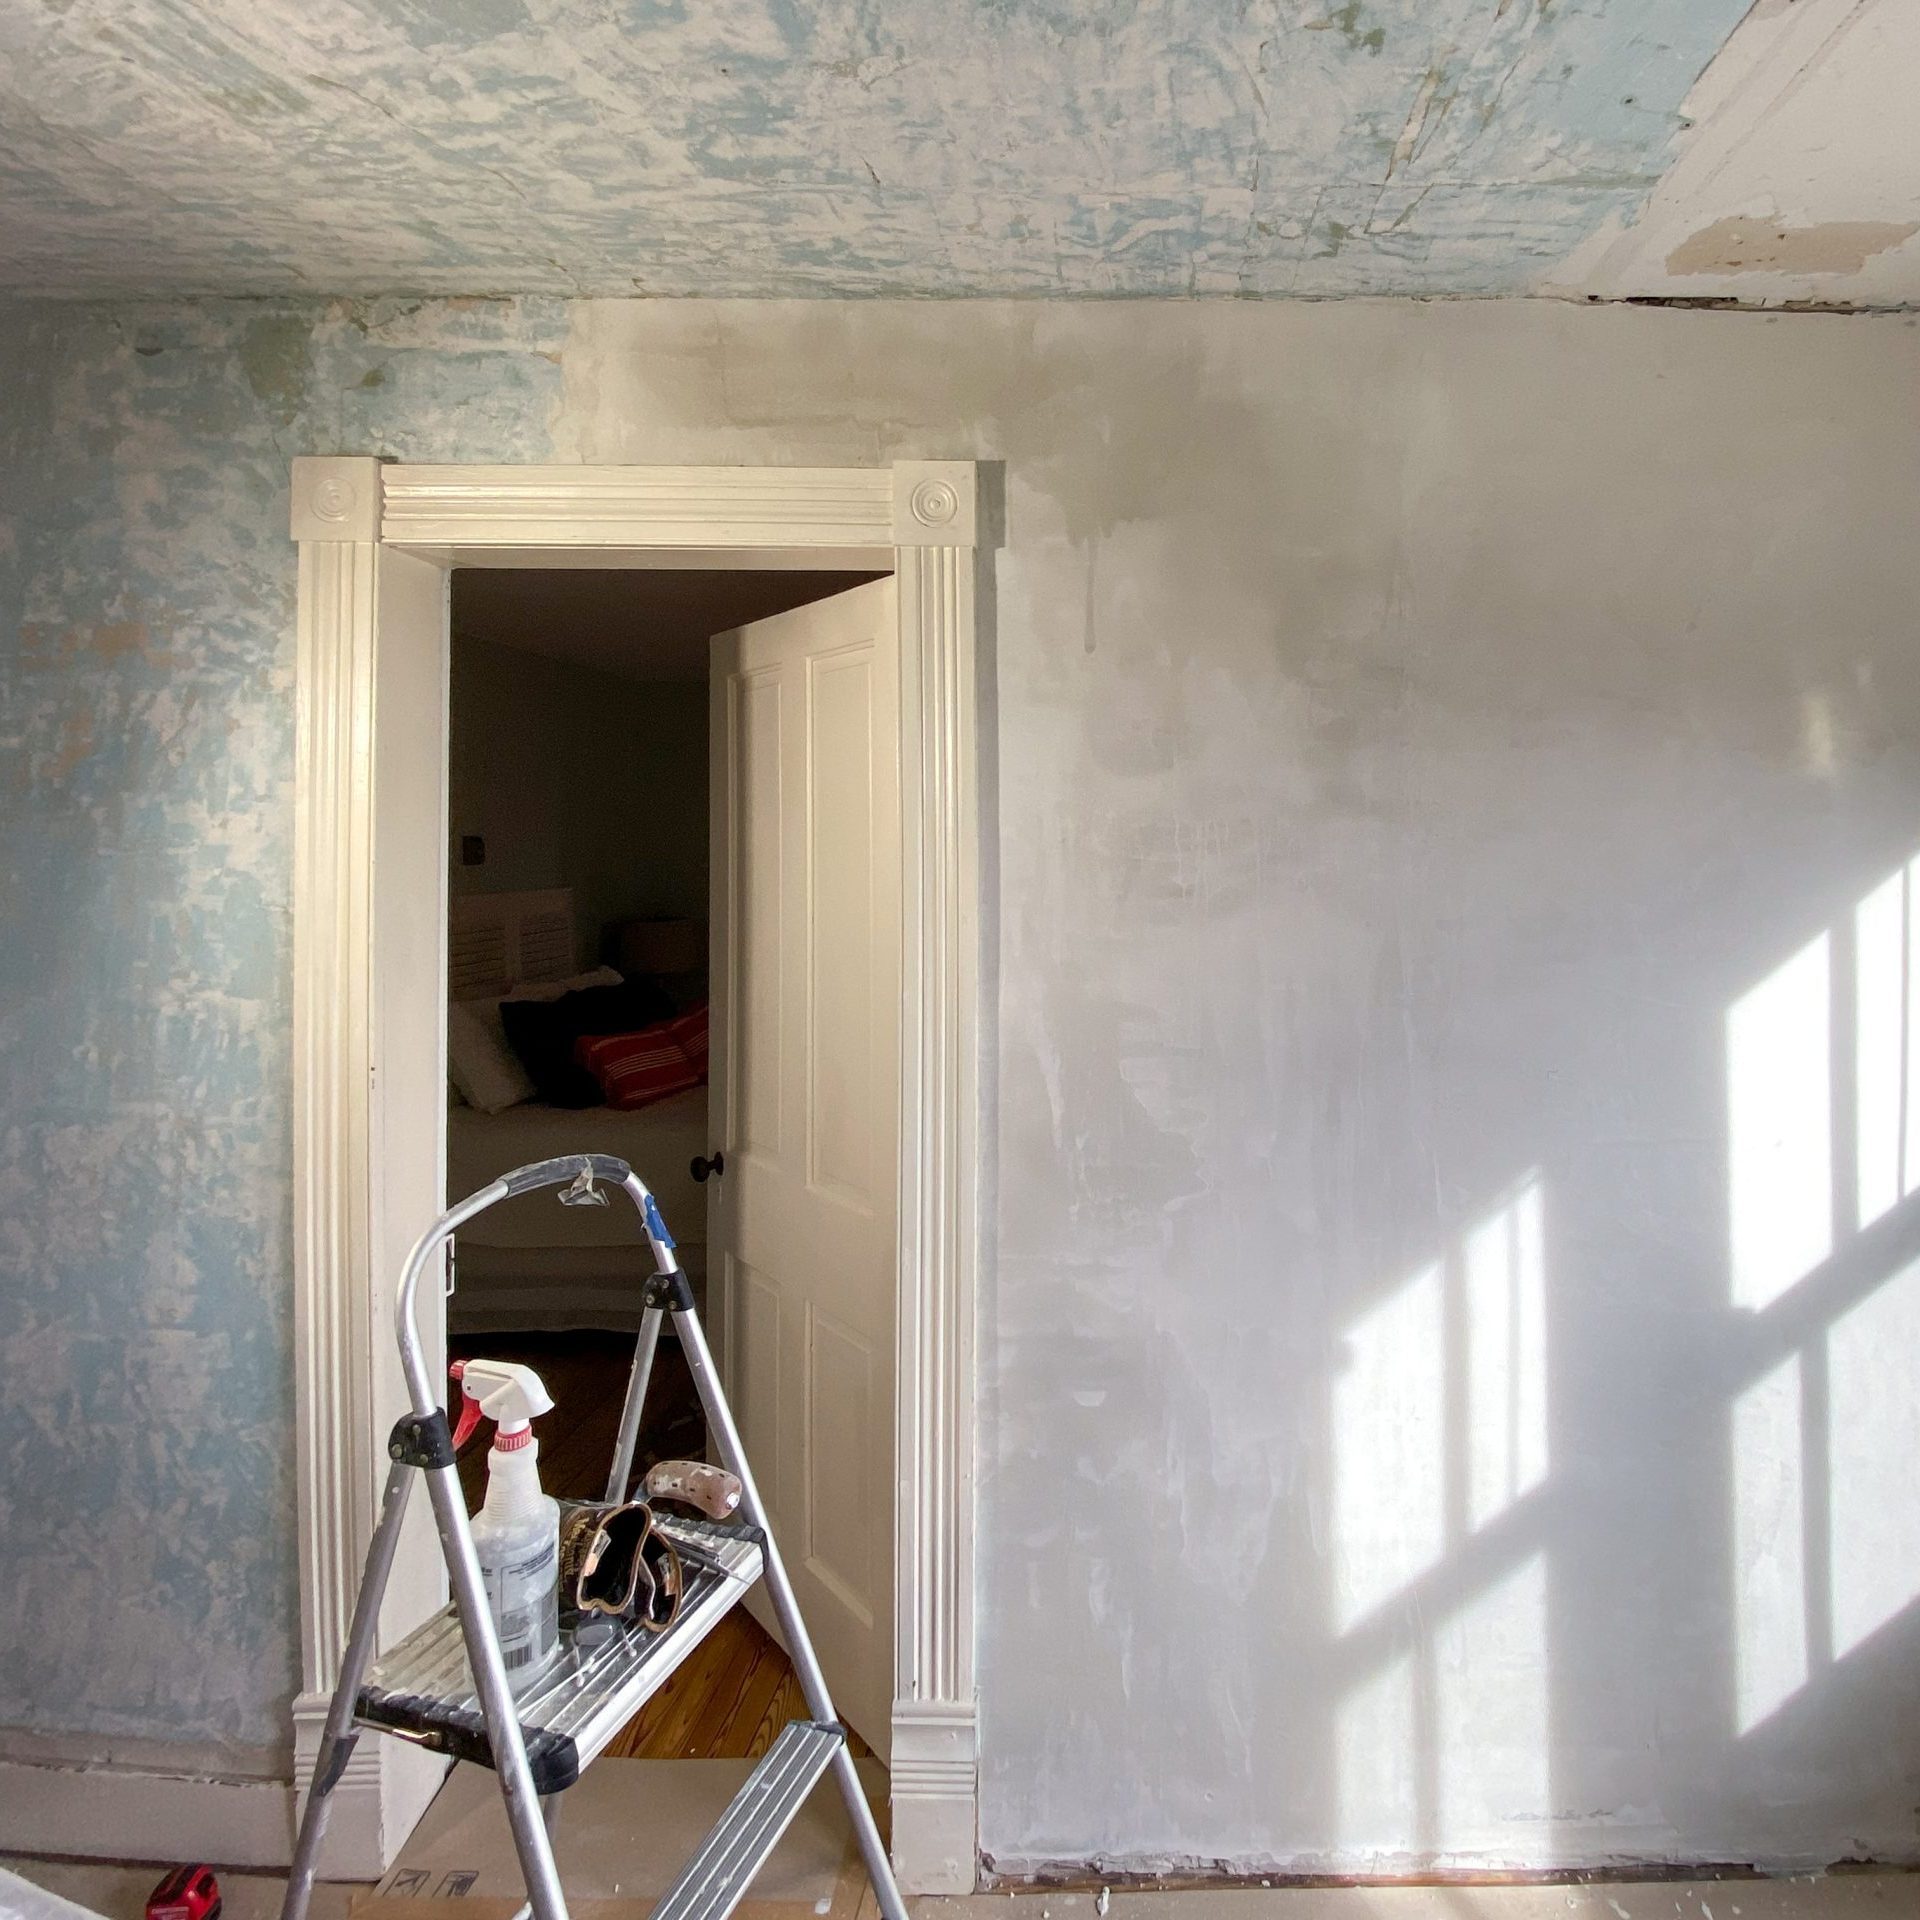 How to plaster a wall: 'Very important' steps for the 'smoothest finish' -  'Avoids bumps